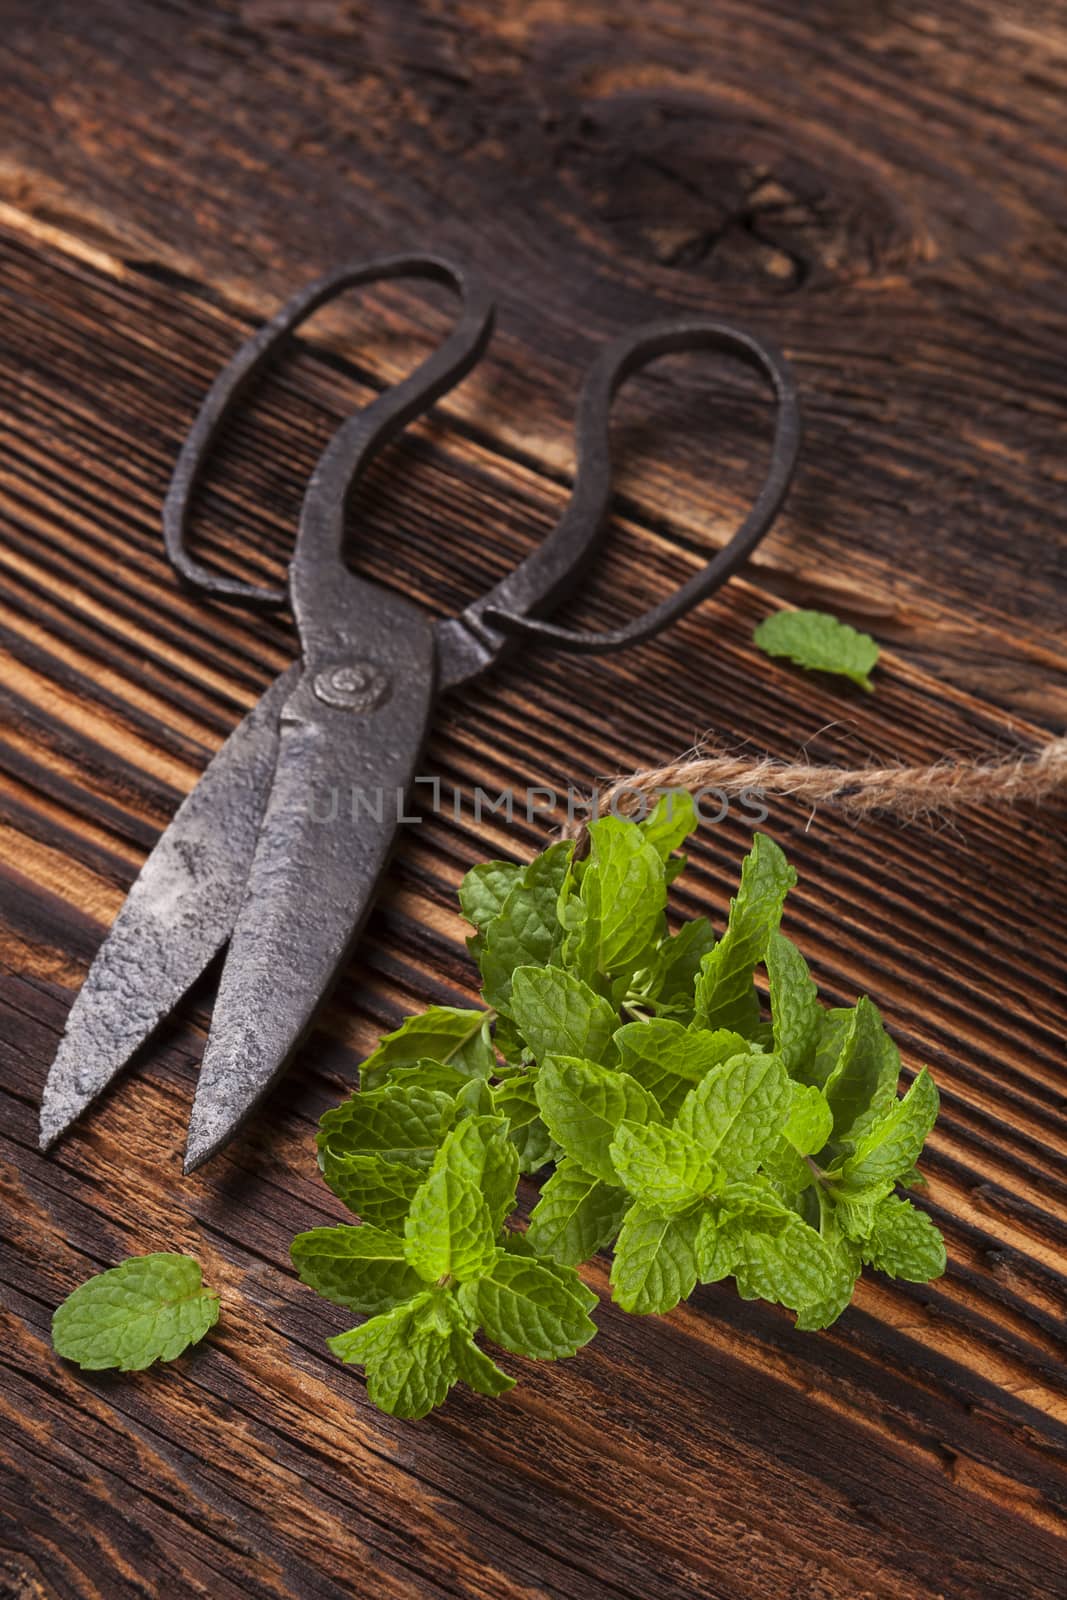 Aromatic culinary herbs, fresh mint herb on wooden rustic background with old vintage scissors.